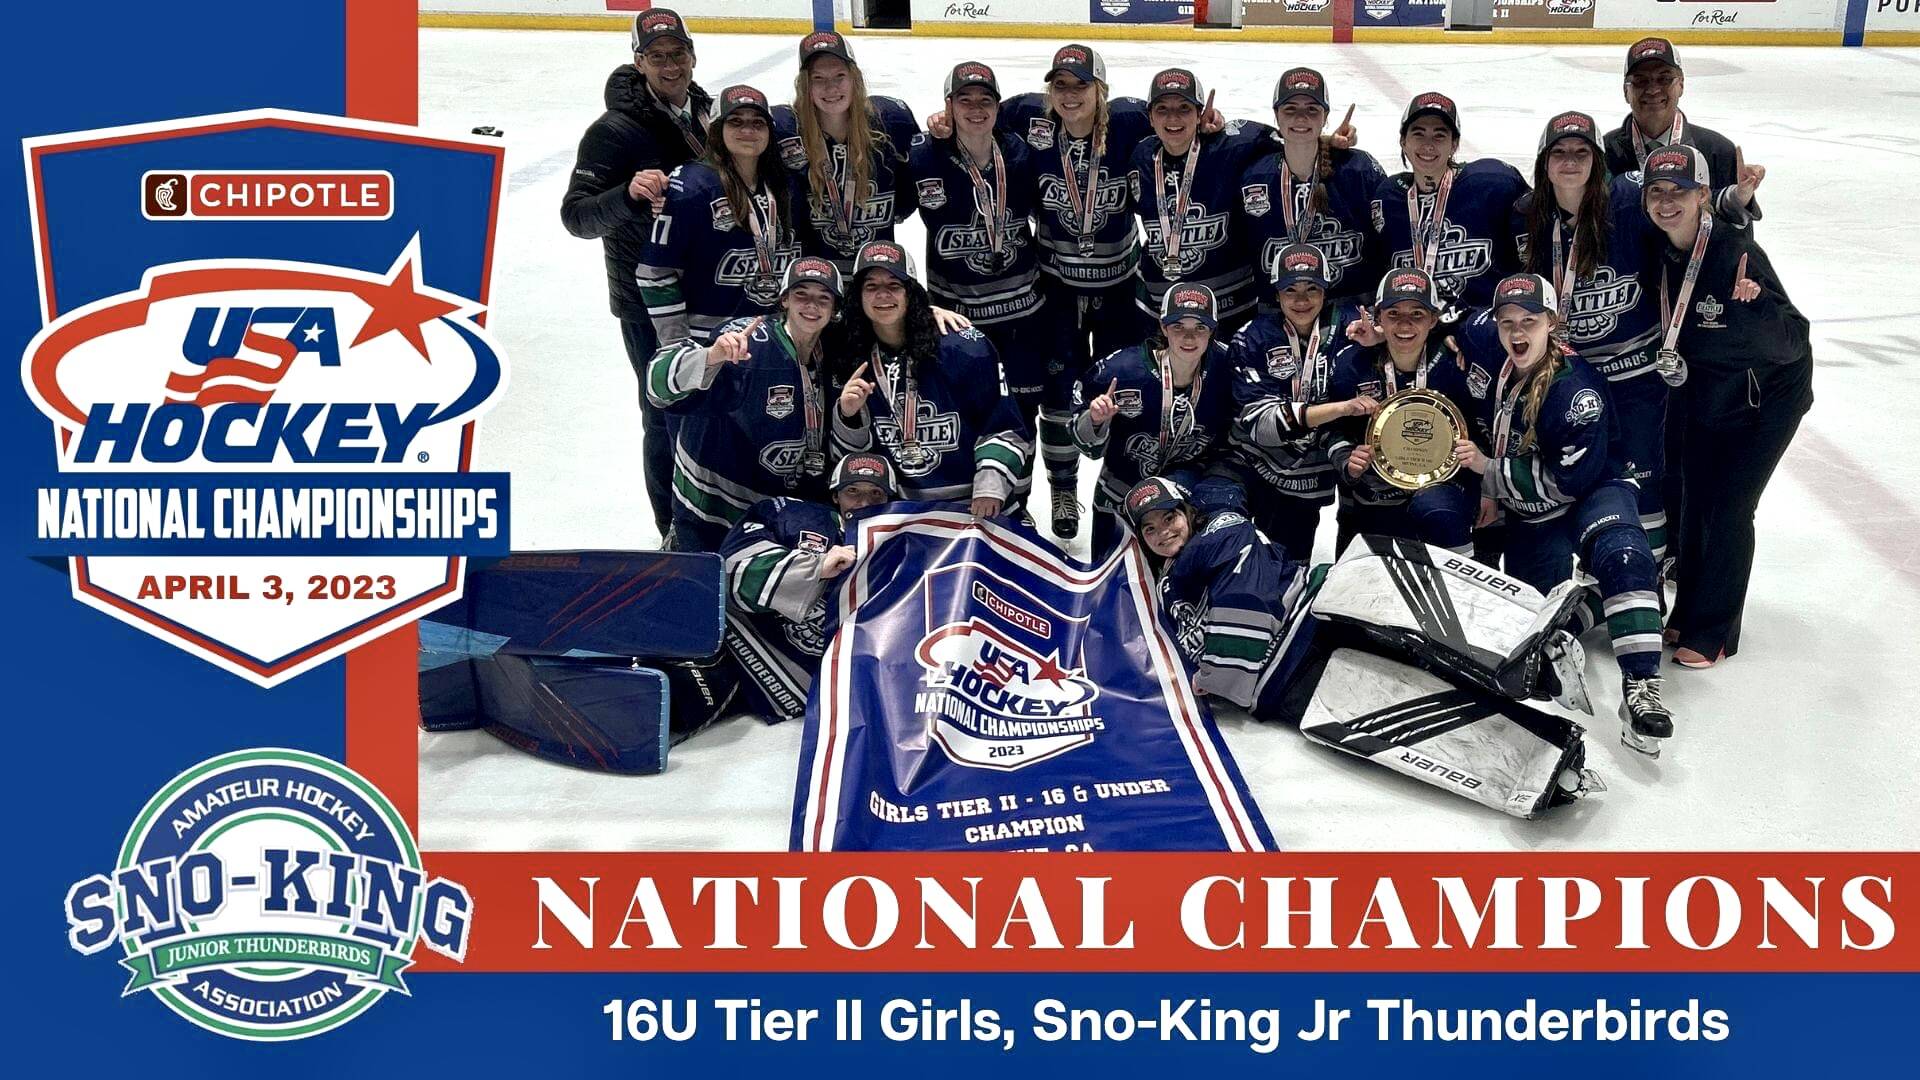 The Sno-King Junior Thunderbirds became national champions in the 16U Tier II girls division. Photo courtesy of Jacqueline Connell.